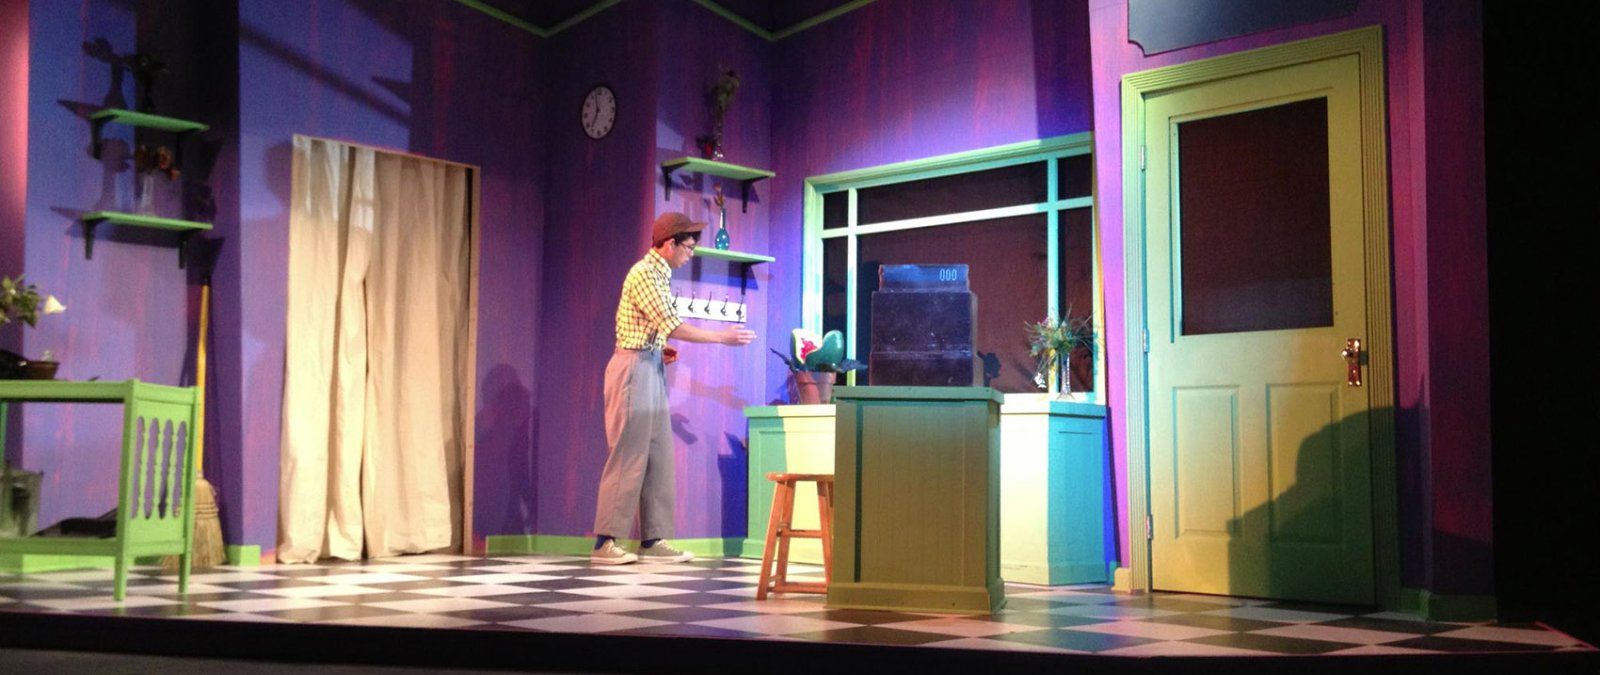 Male actor cautiously approaching sink while acting in Little Shop of Horrors